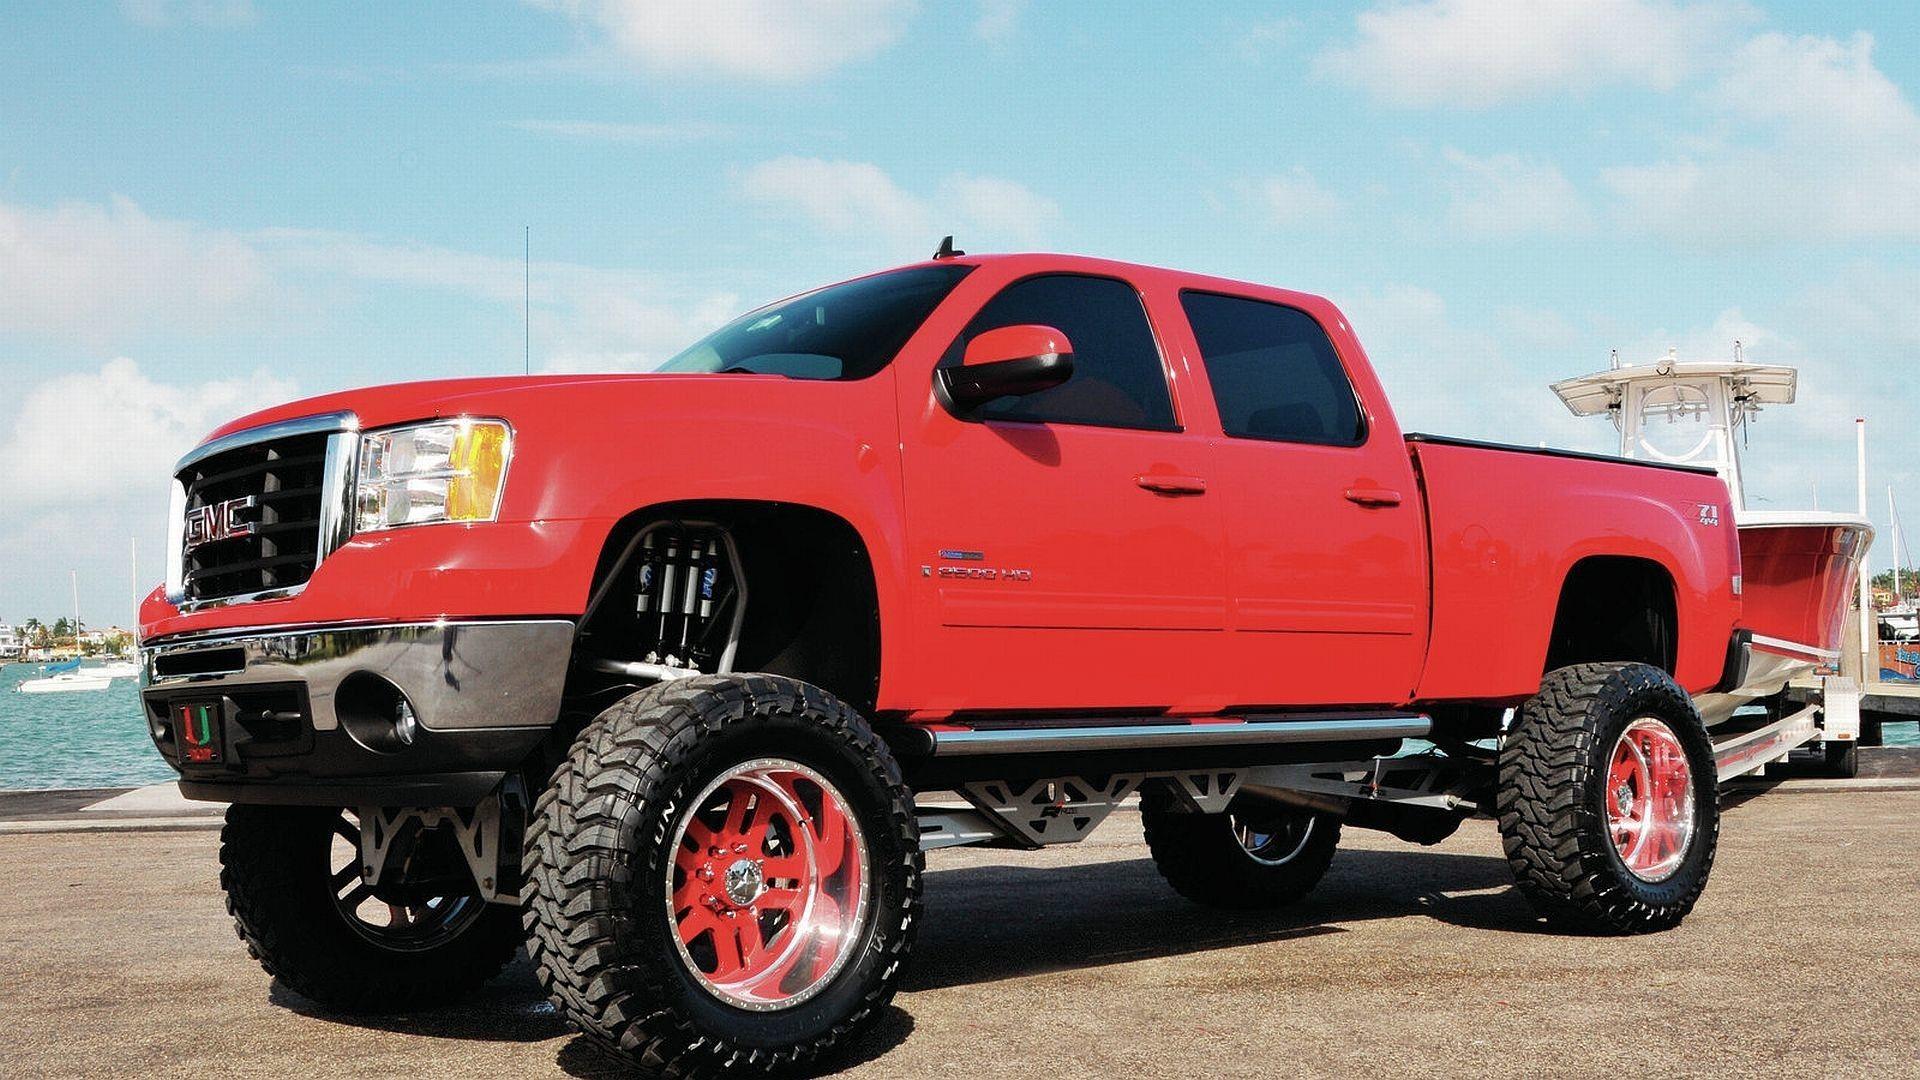 Lifted Trucks Wallpapers.